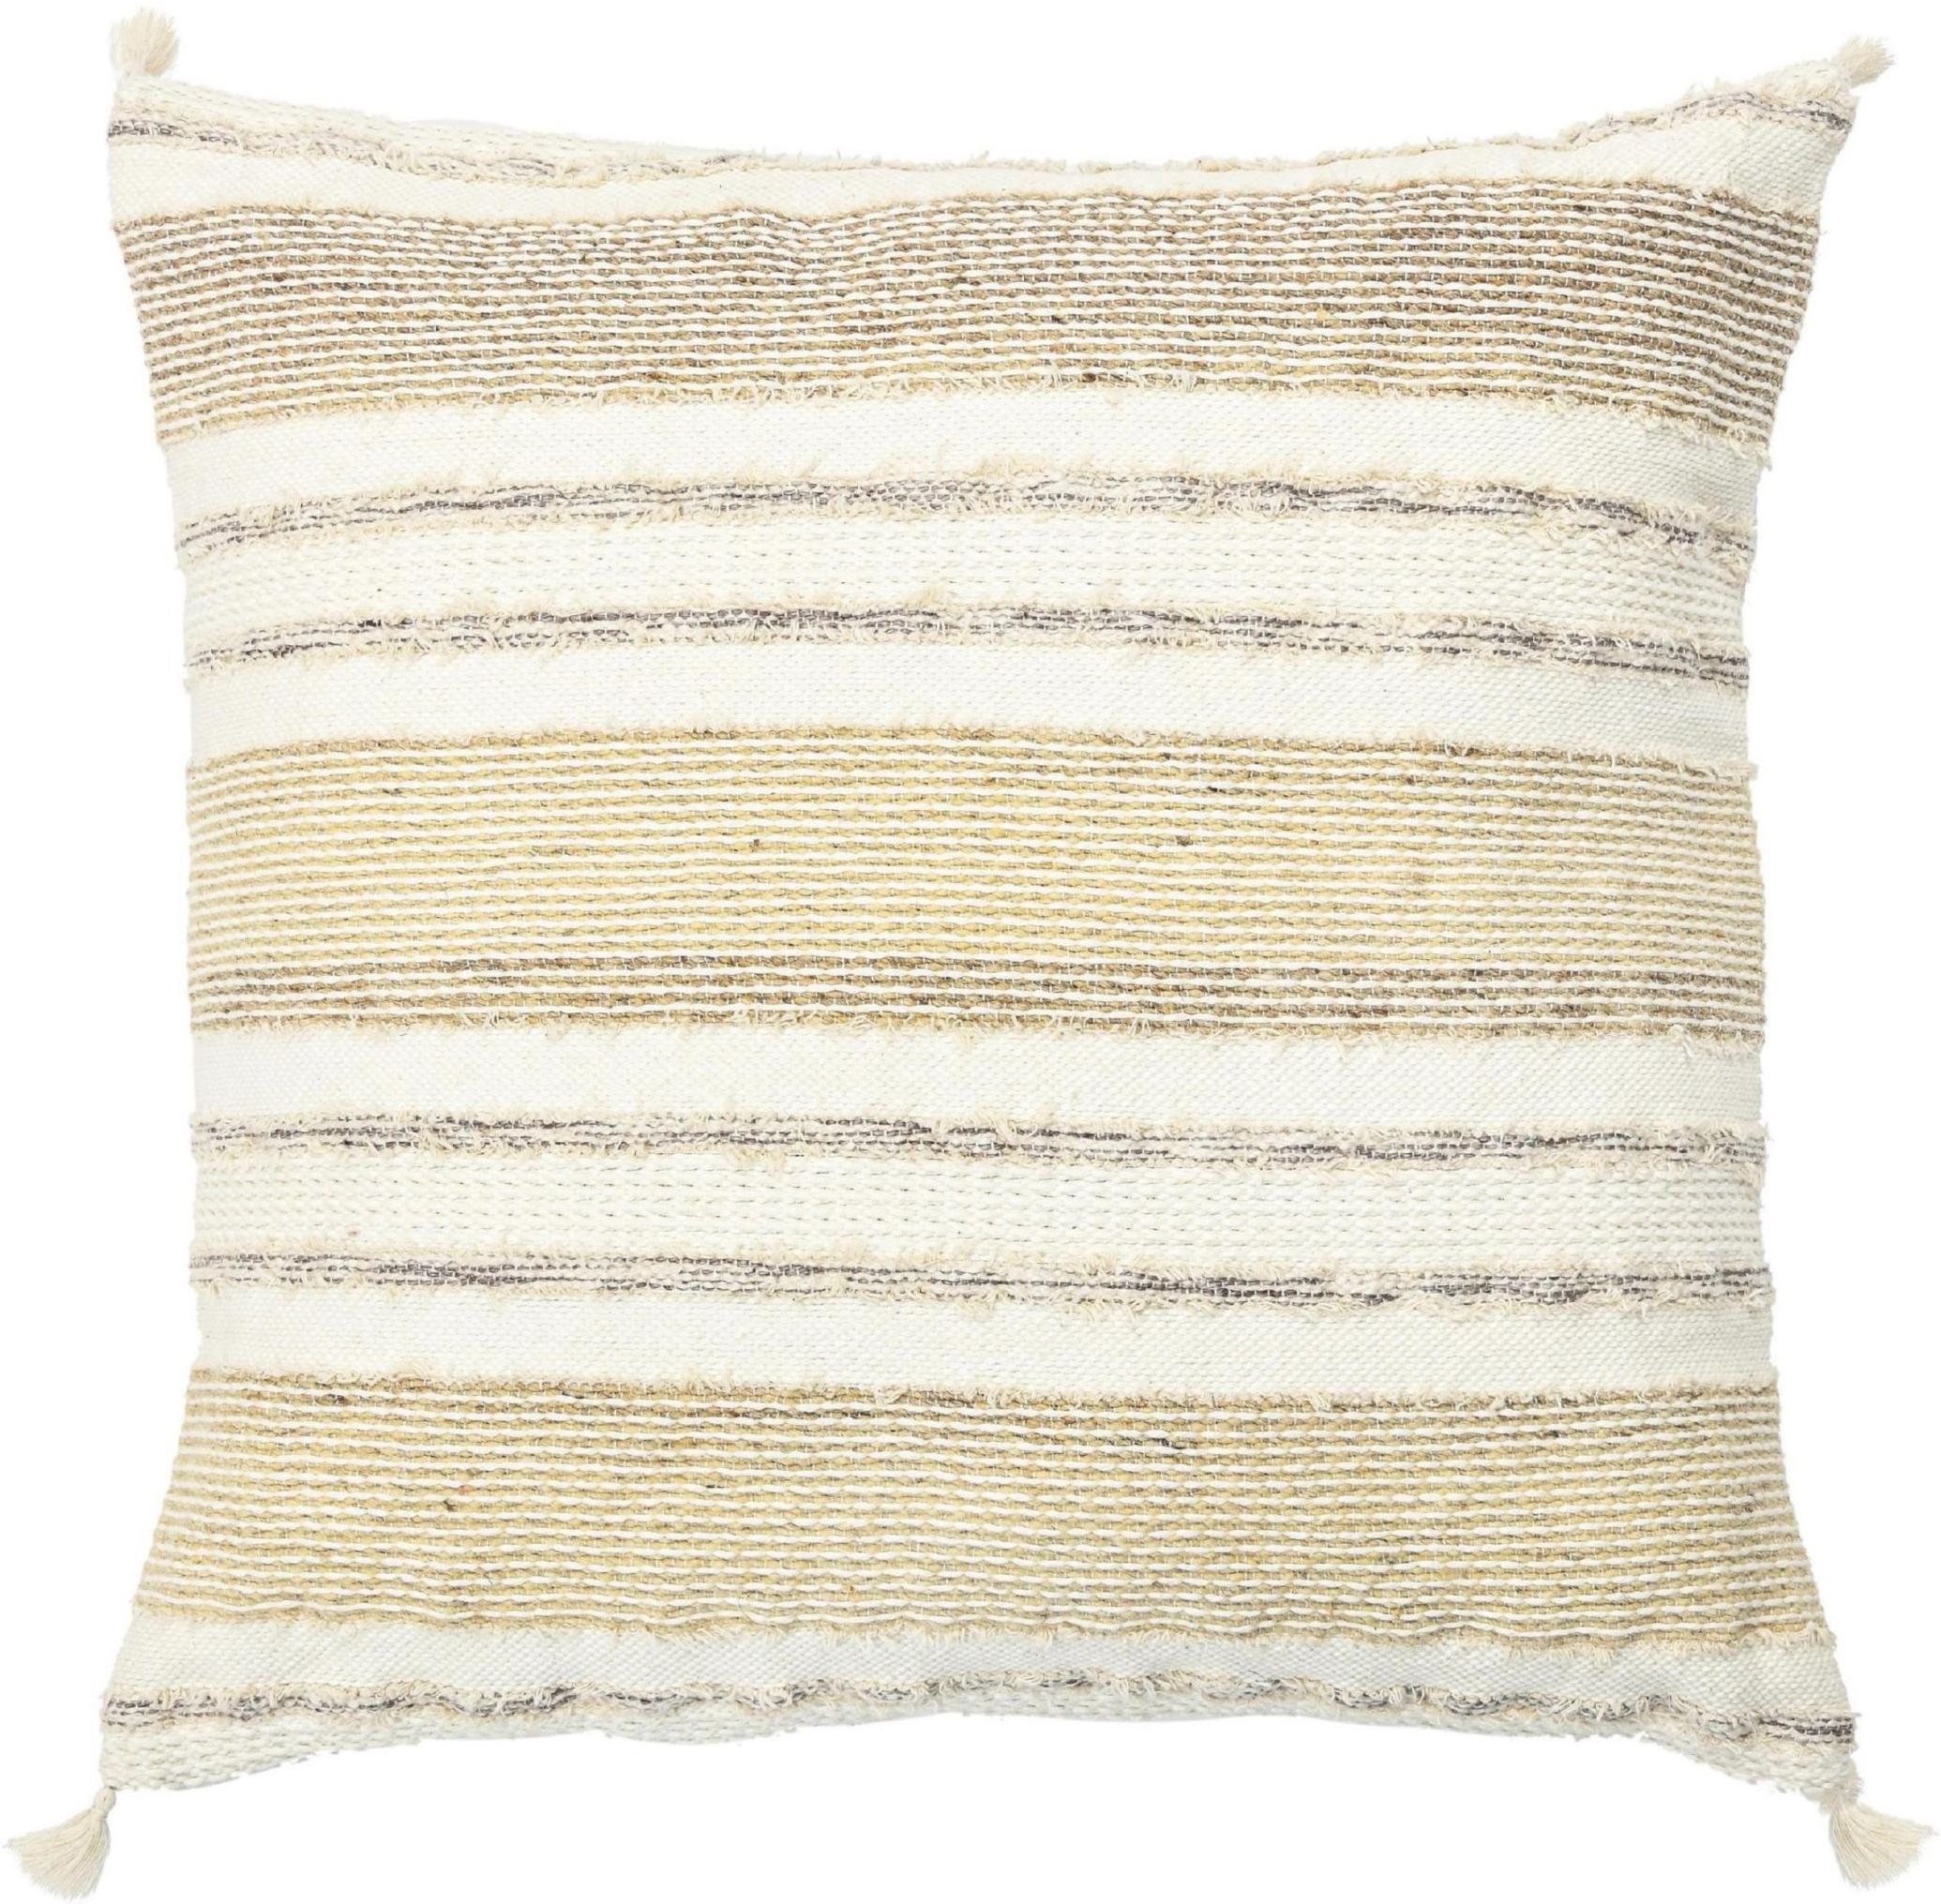 Elevate your home's look with a chic Modern Wool and Cotton Pillow, meticulously handmade with opulent materials, in a 20